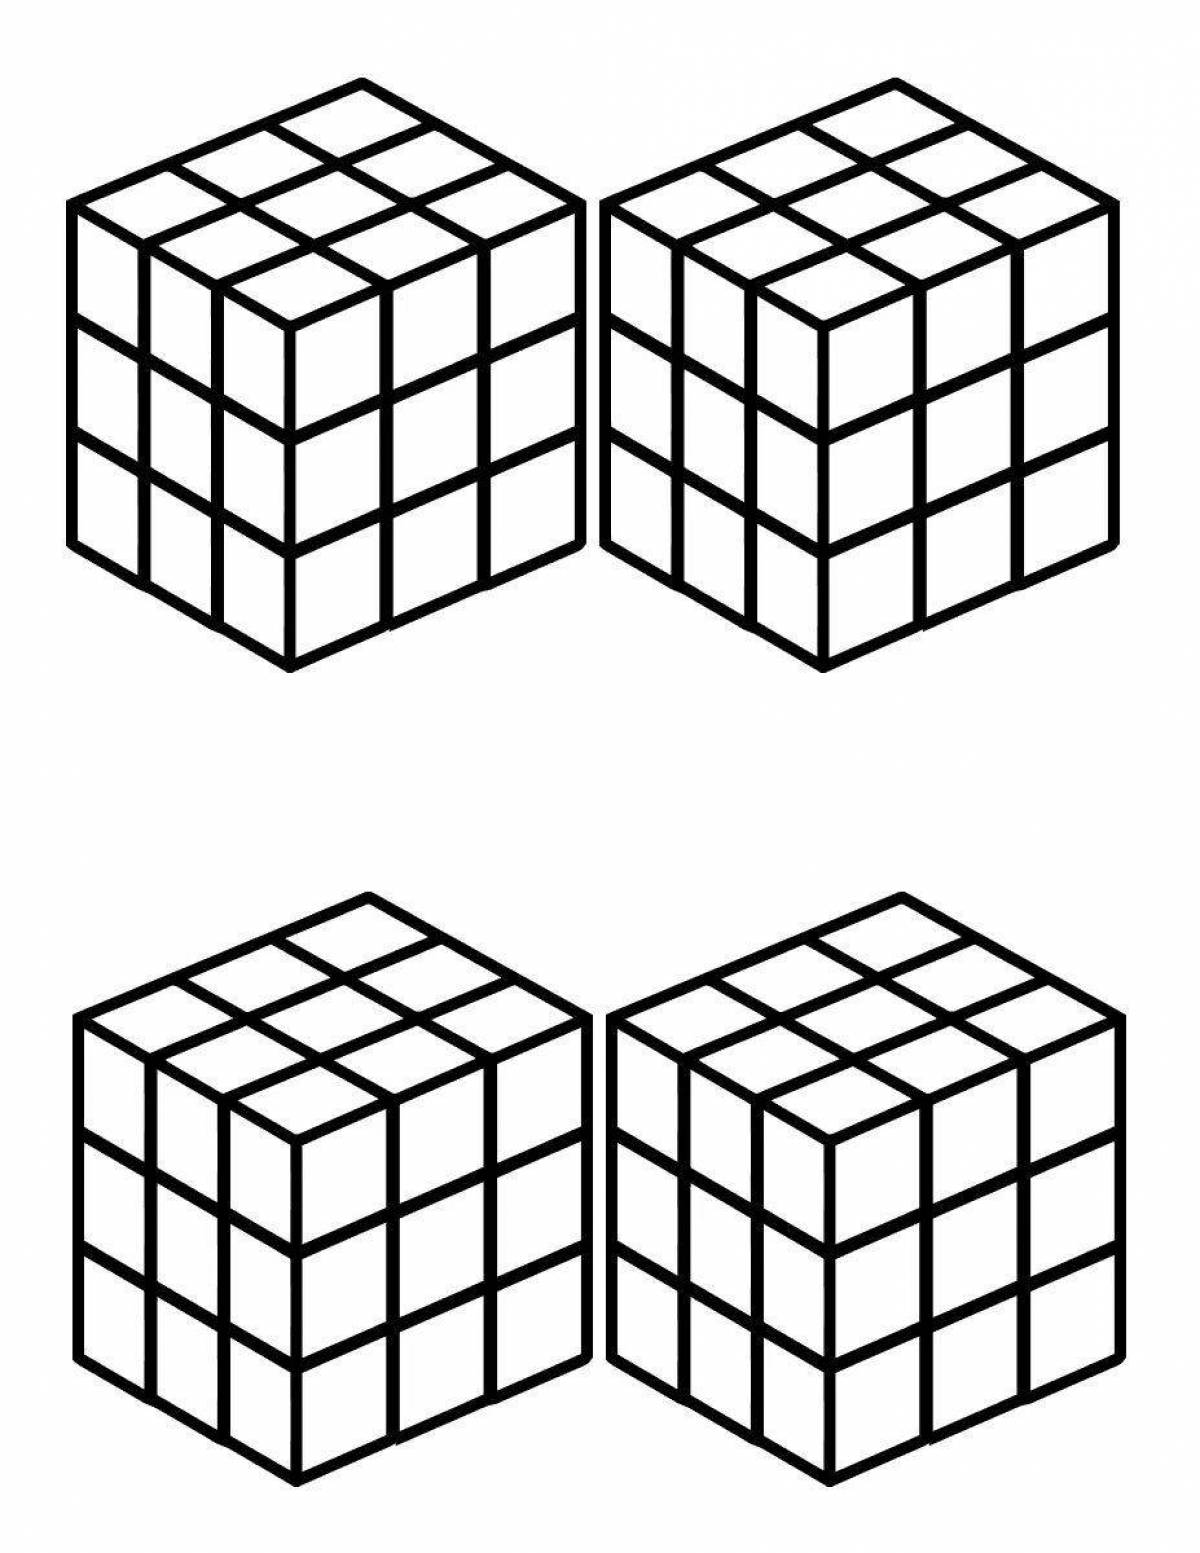 Colorful Rubik's Cube Coloring Page for Beginners